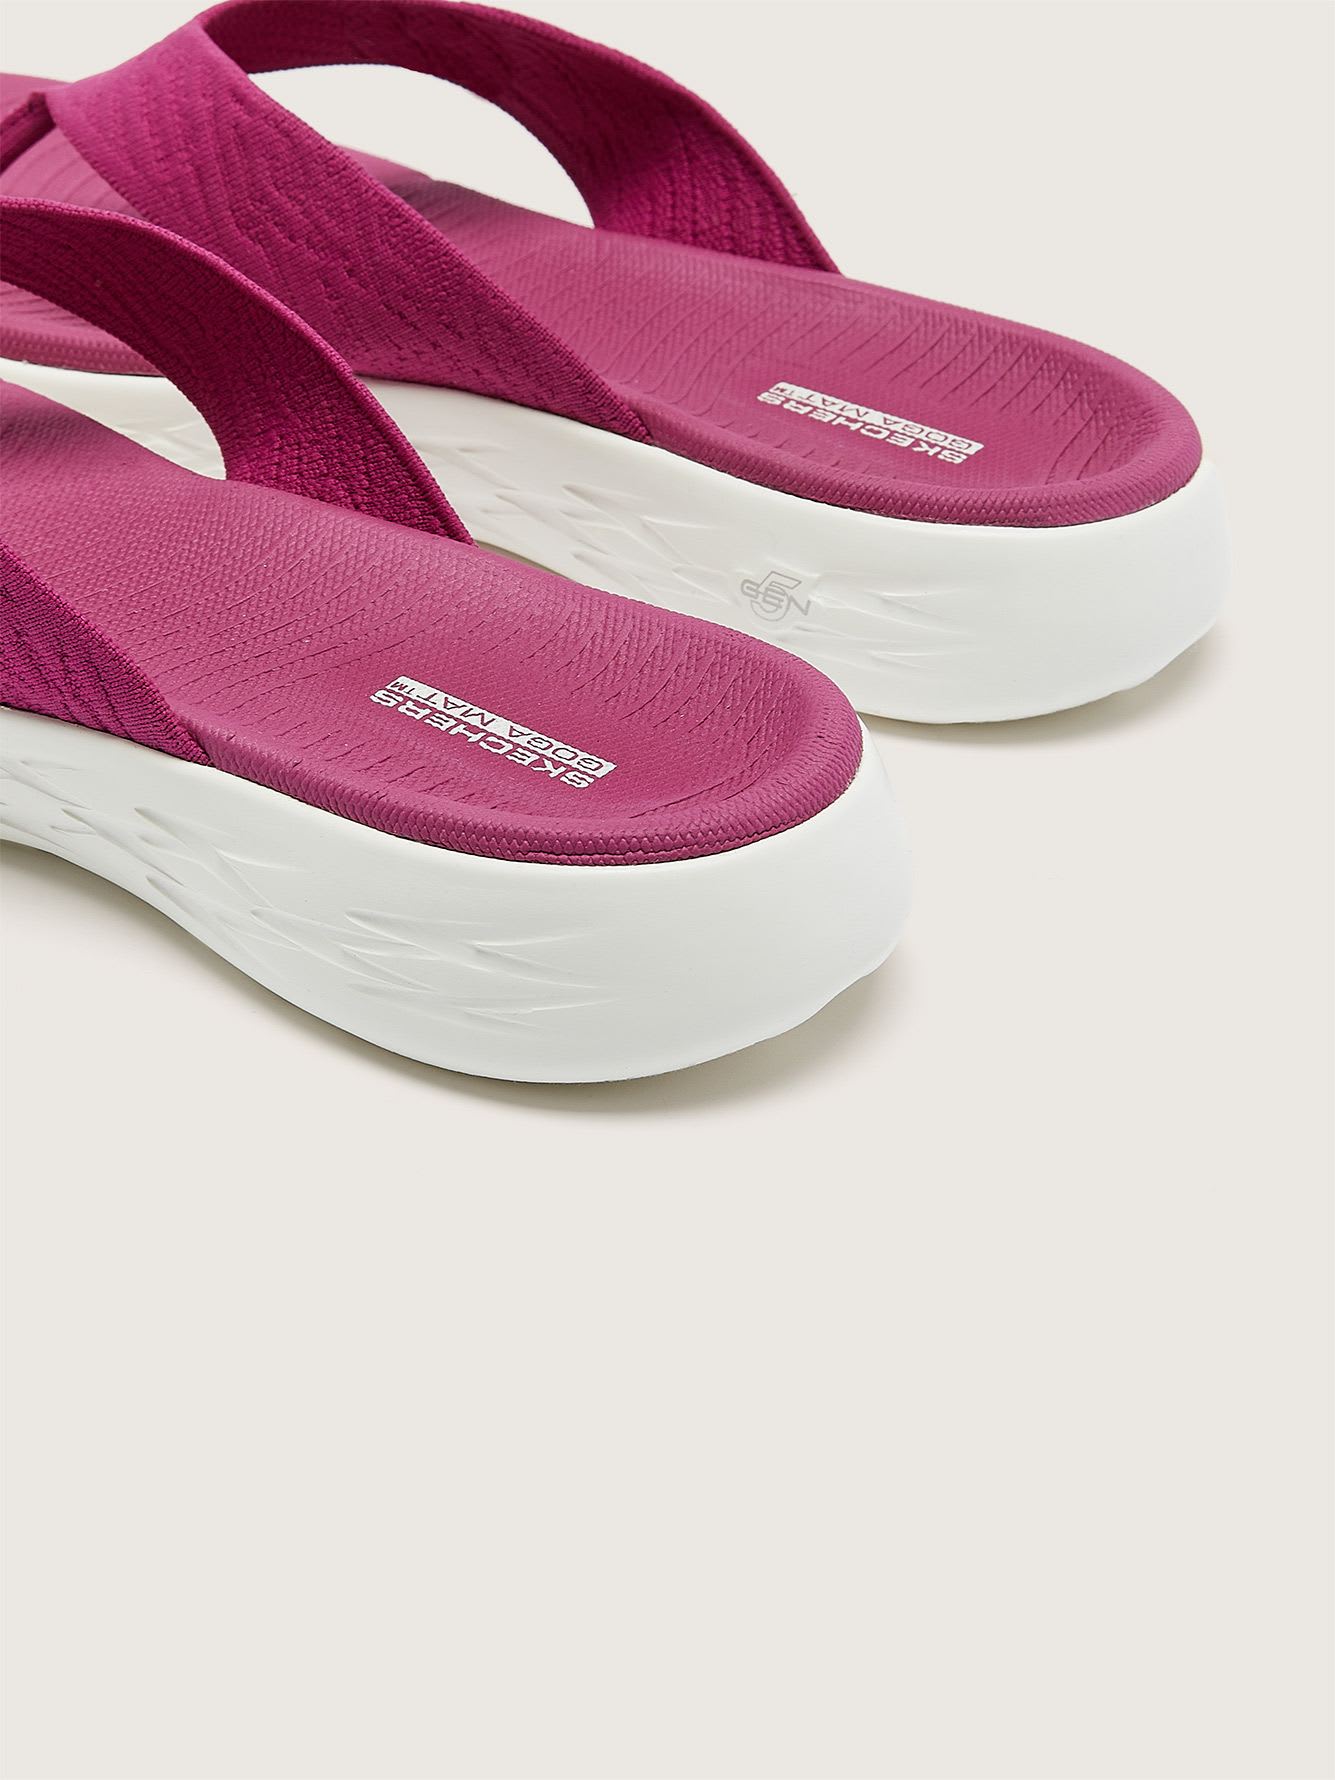 Sandale tong On-the-Go Sunny, pied large - Skechers